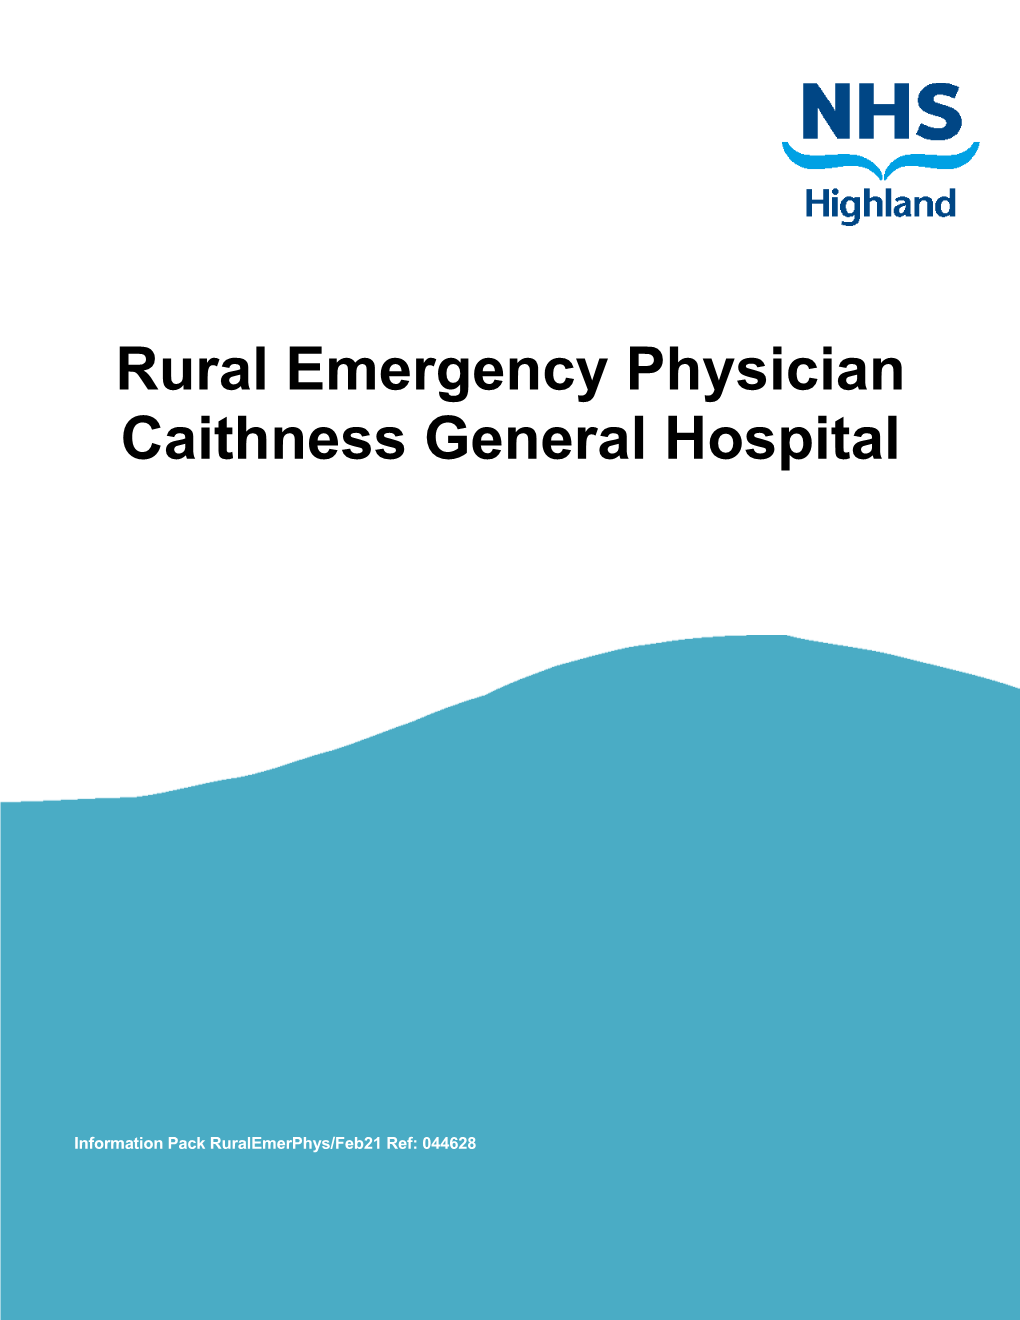 Rural Emergency Physician Caithness General Hospital